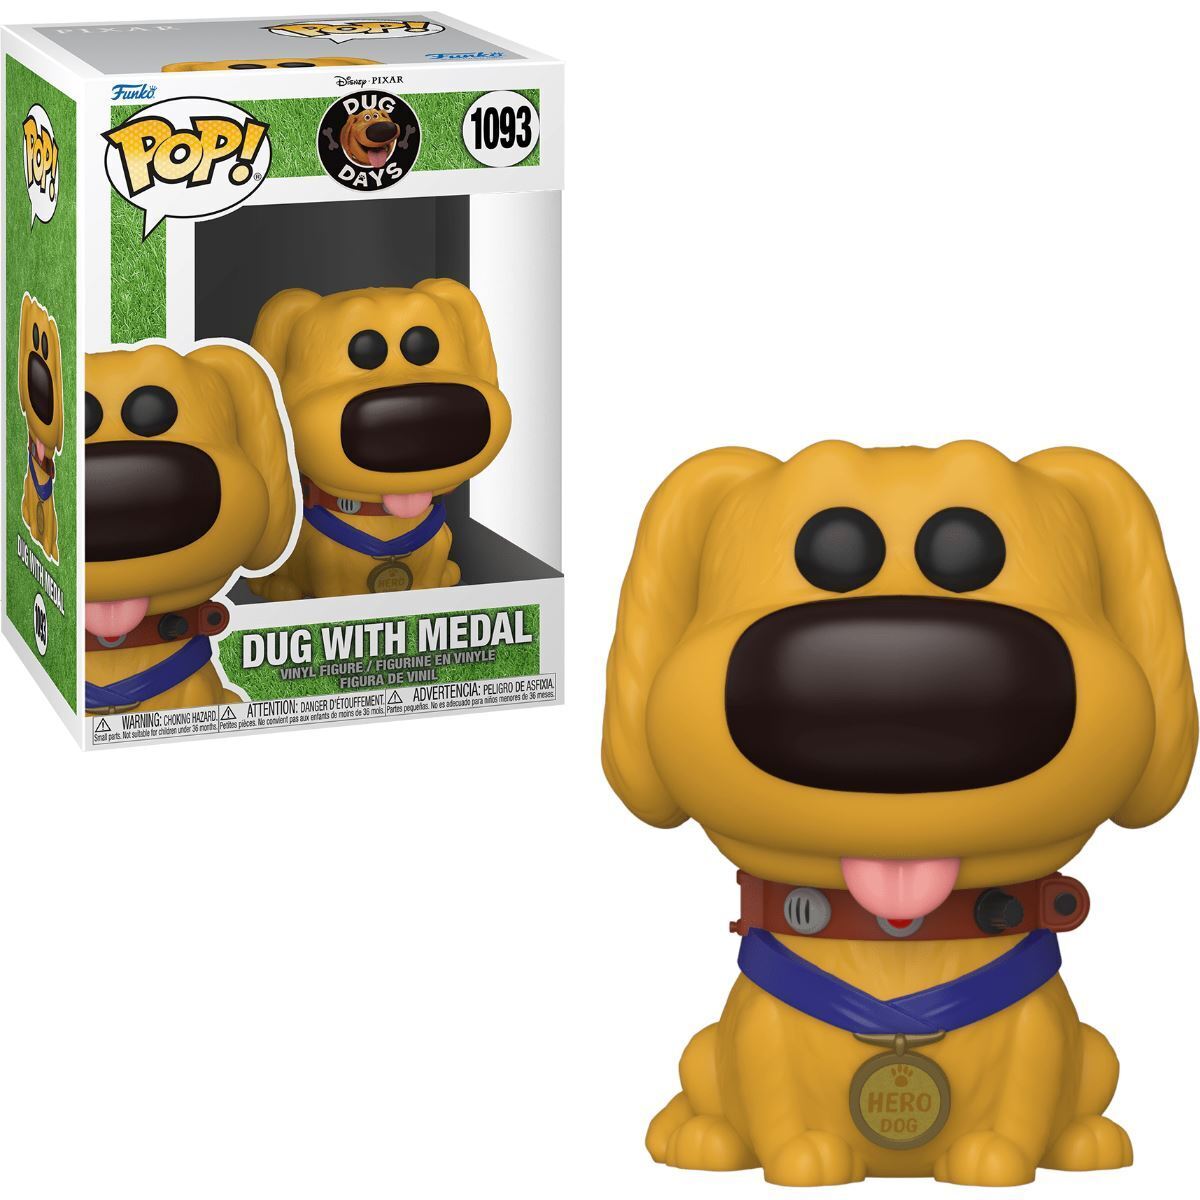 Funko Pop 1093 - Dug Days with Medal